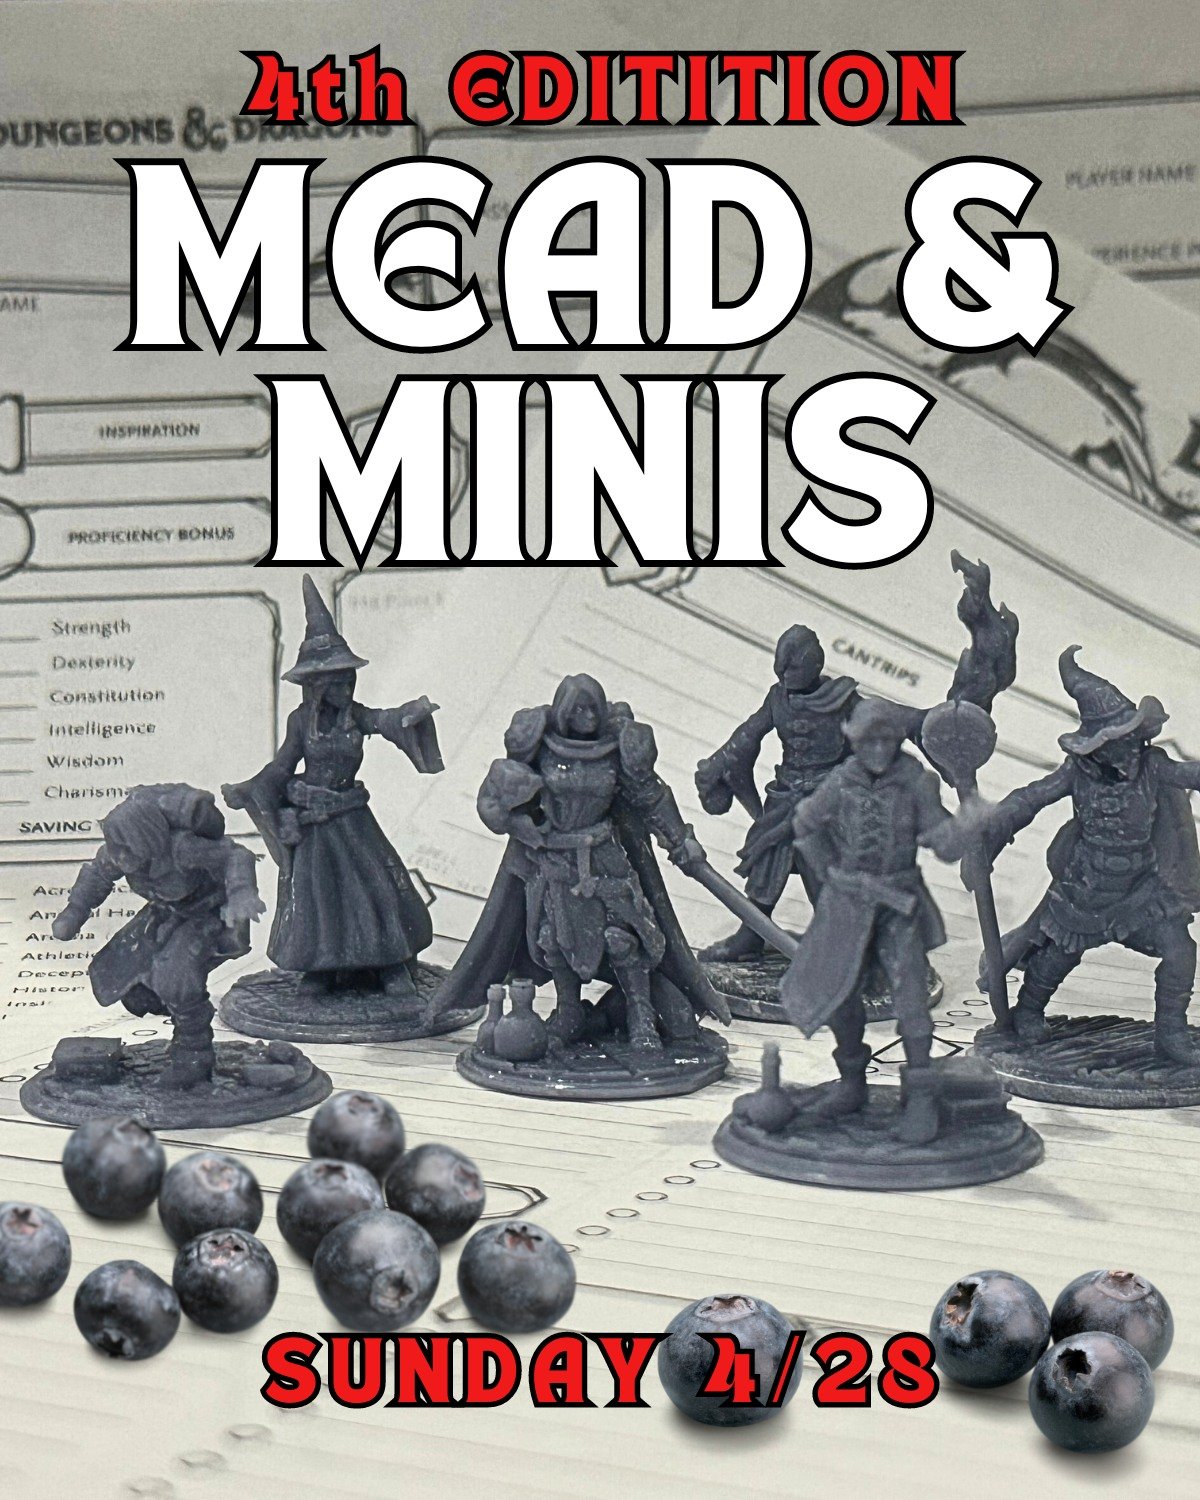 Mead &amp; Minis is back! 
Join us Sunday for a paint and sip with Dungeons and Dragons miniatures. 
$12 gets you a 3-D printed mini, paint and brushes, and a pour!
This is a guided event, fun for all, and you get to take home a new friend! 

We've a